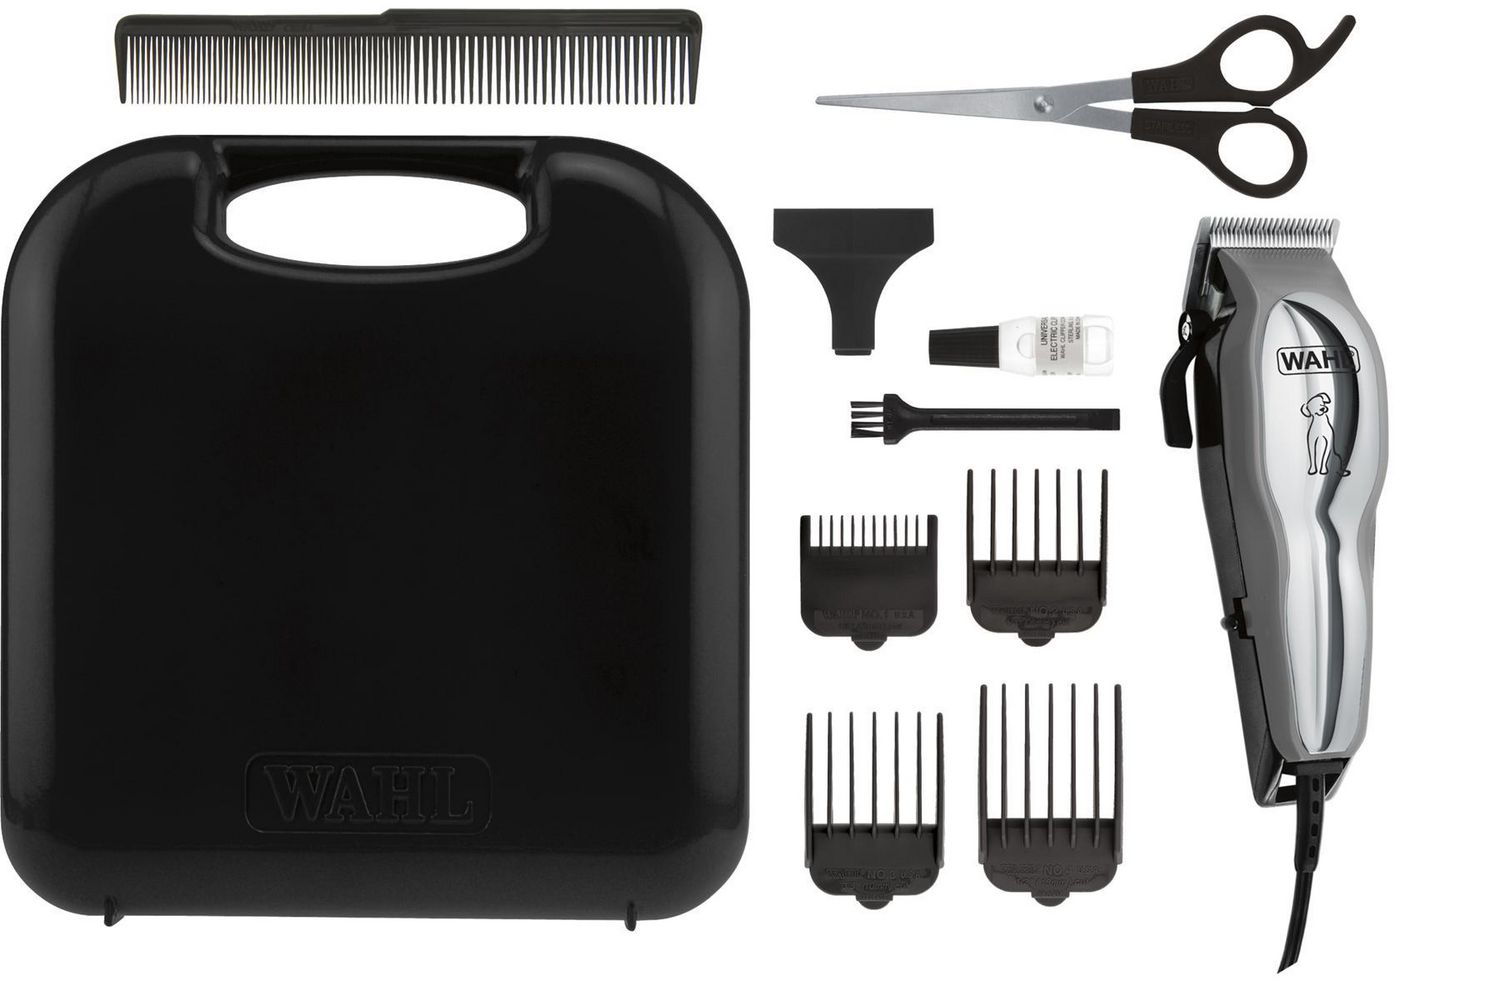 buy wahl dog clippers